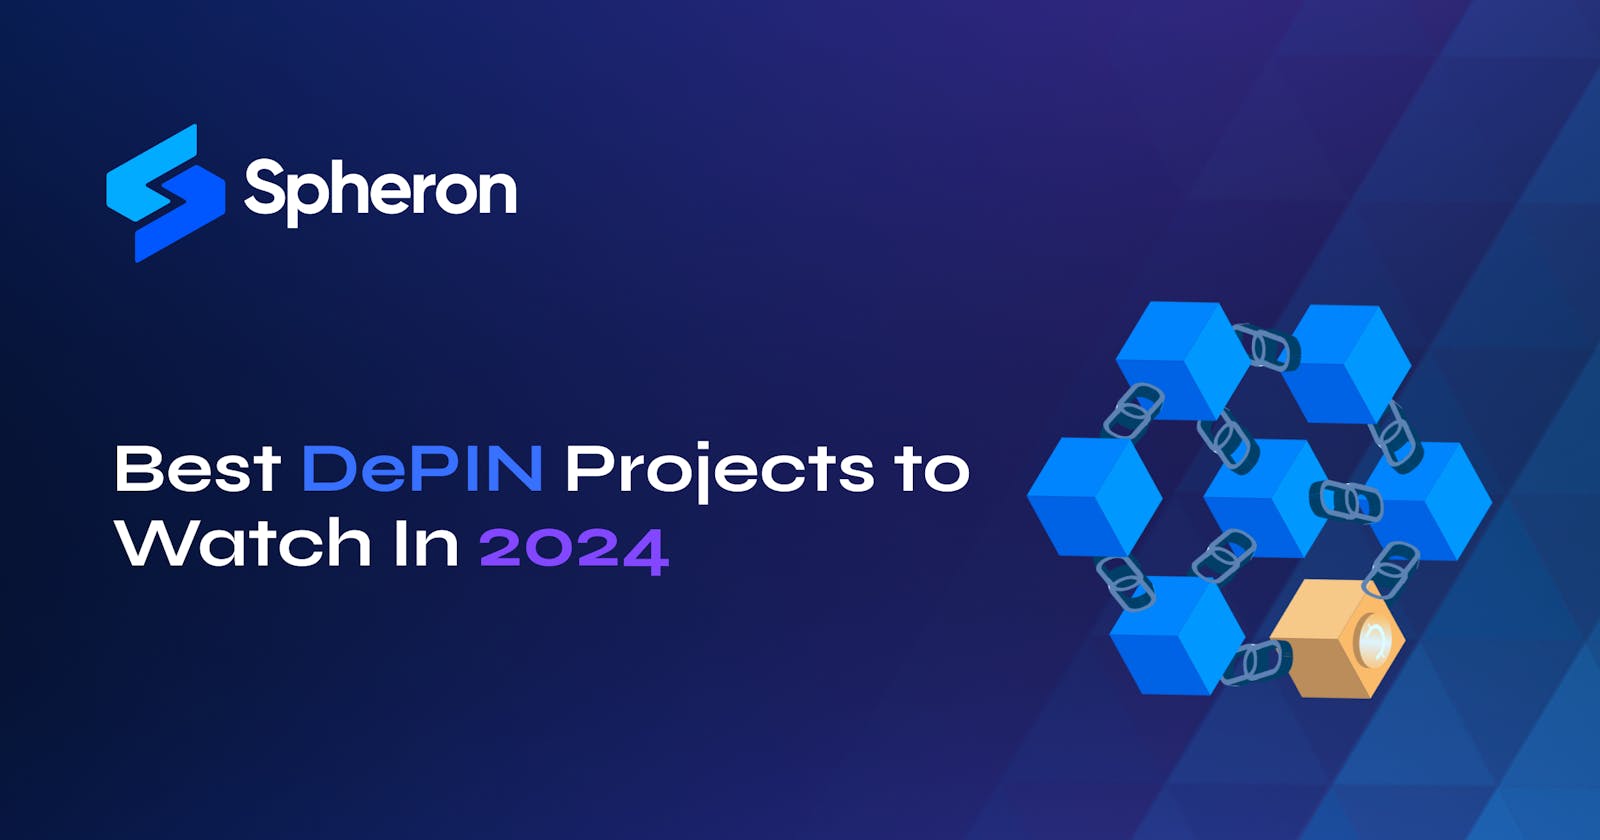 Best DePIN Projects to Watch In 2024